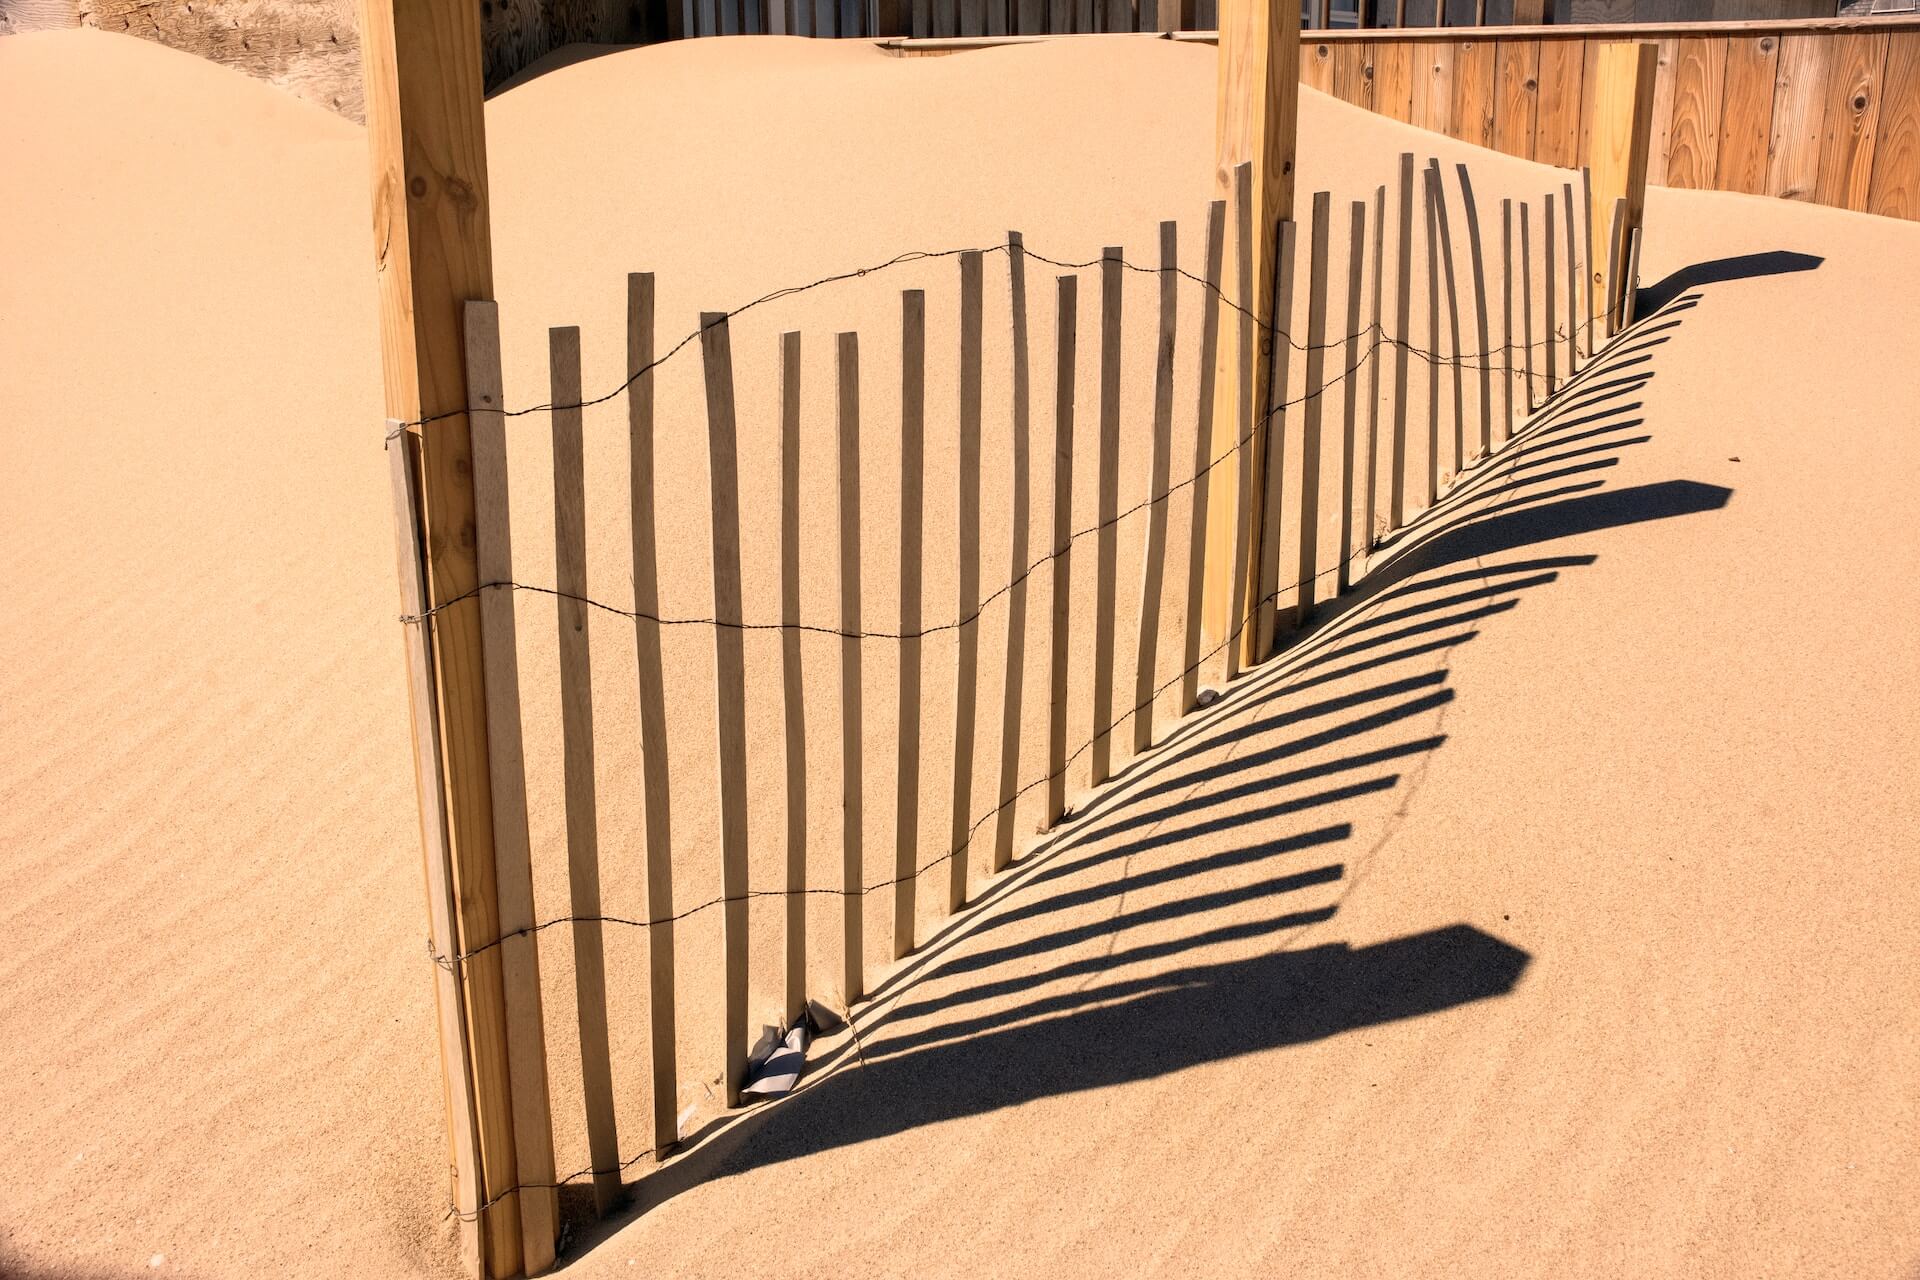 Simple wood fence on a sandy beach for Cape Cod catering.